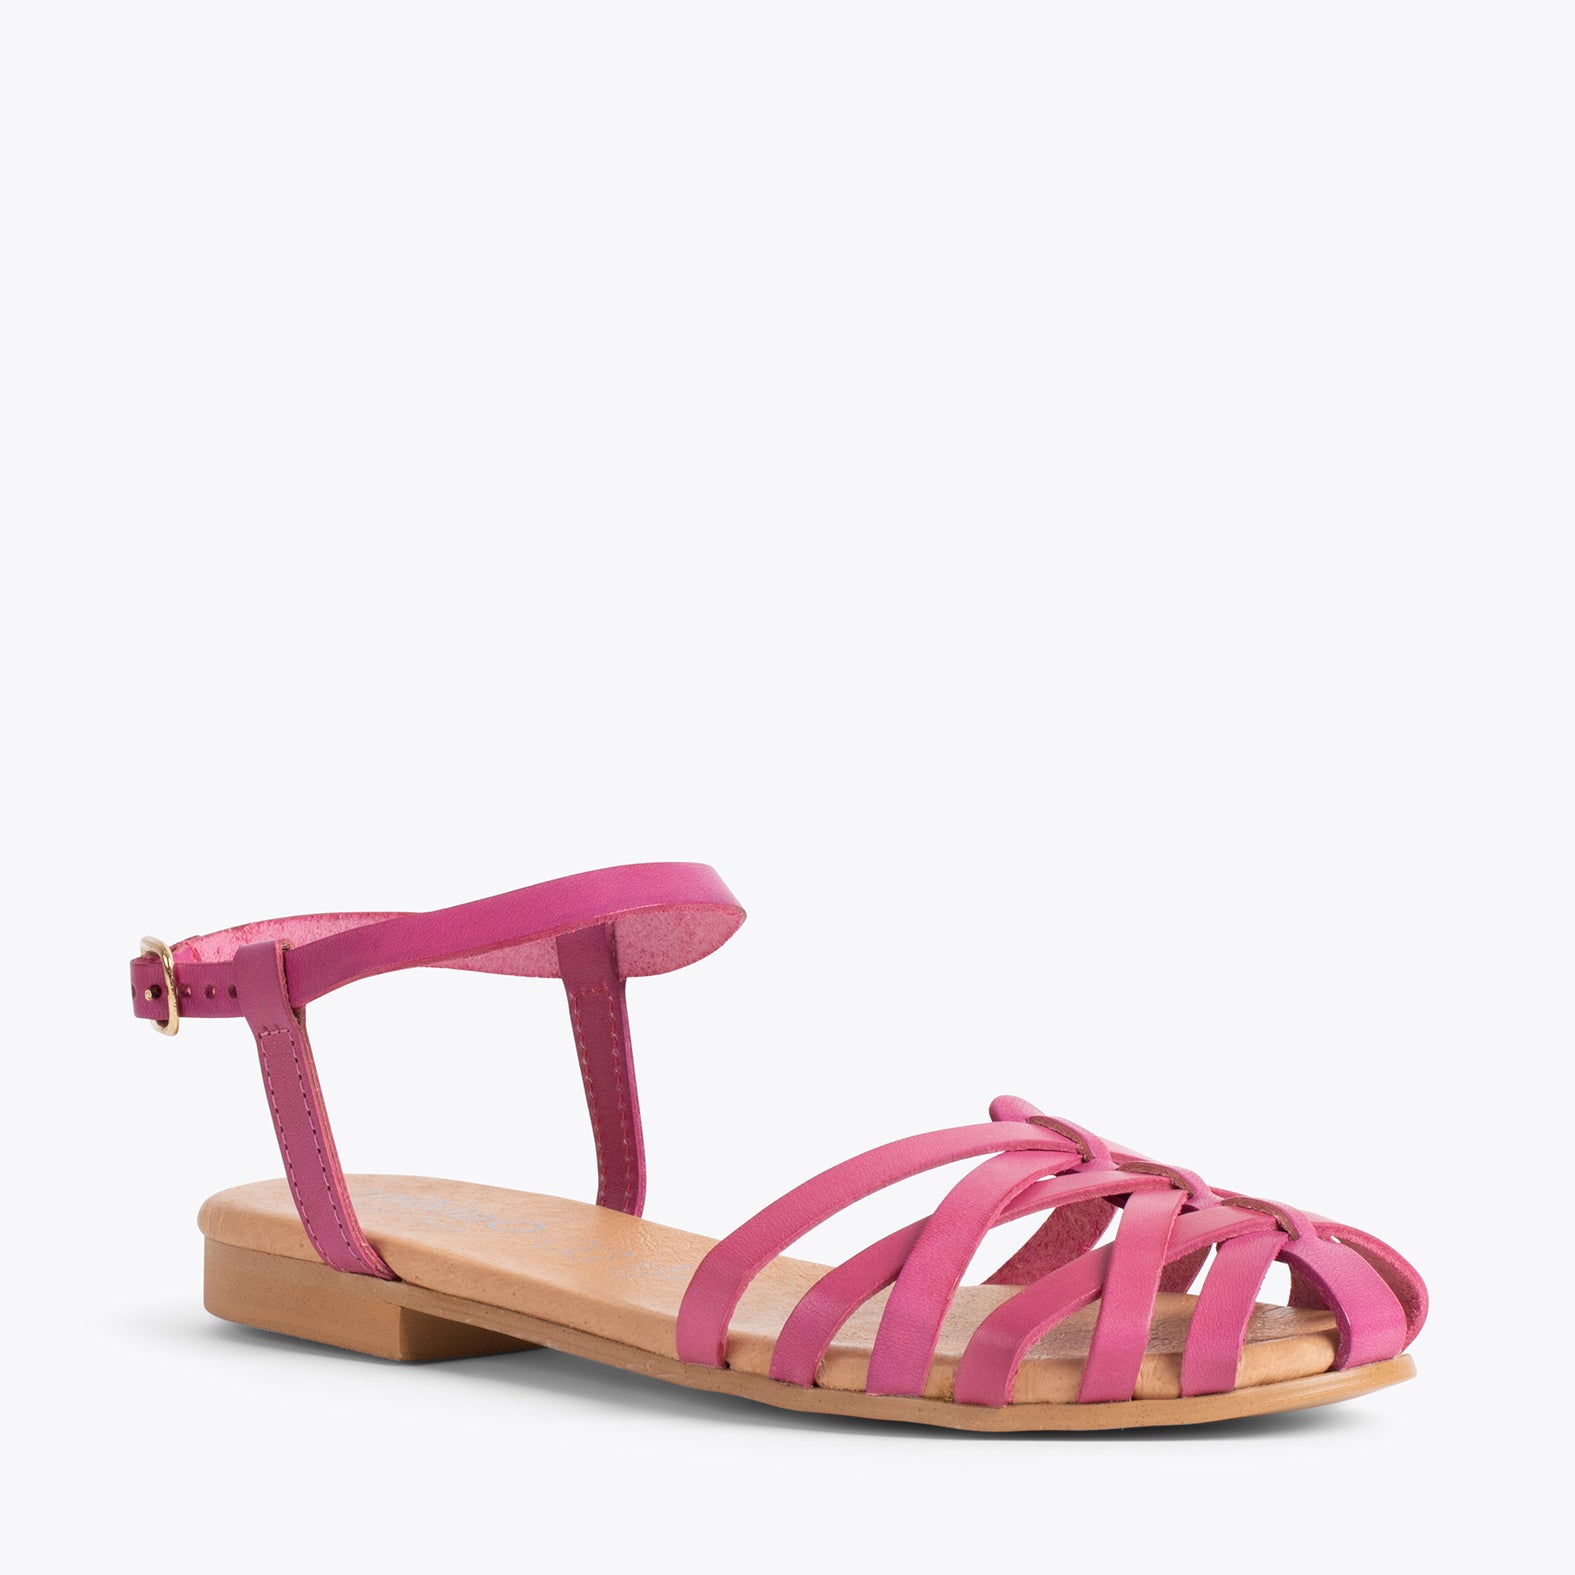 BEACH - PINK sandal with straps